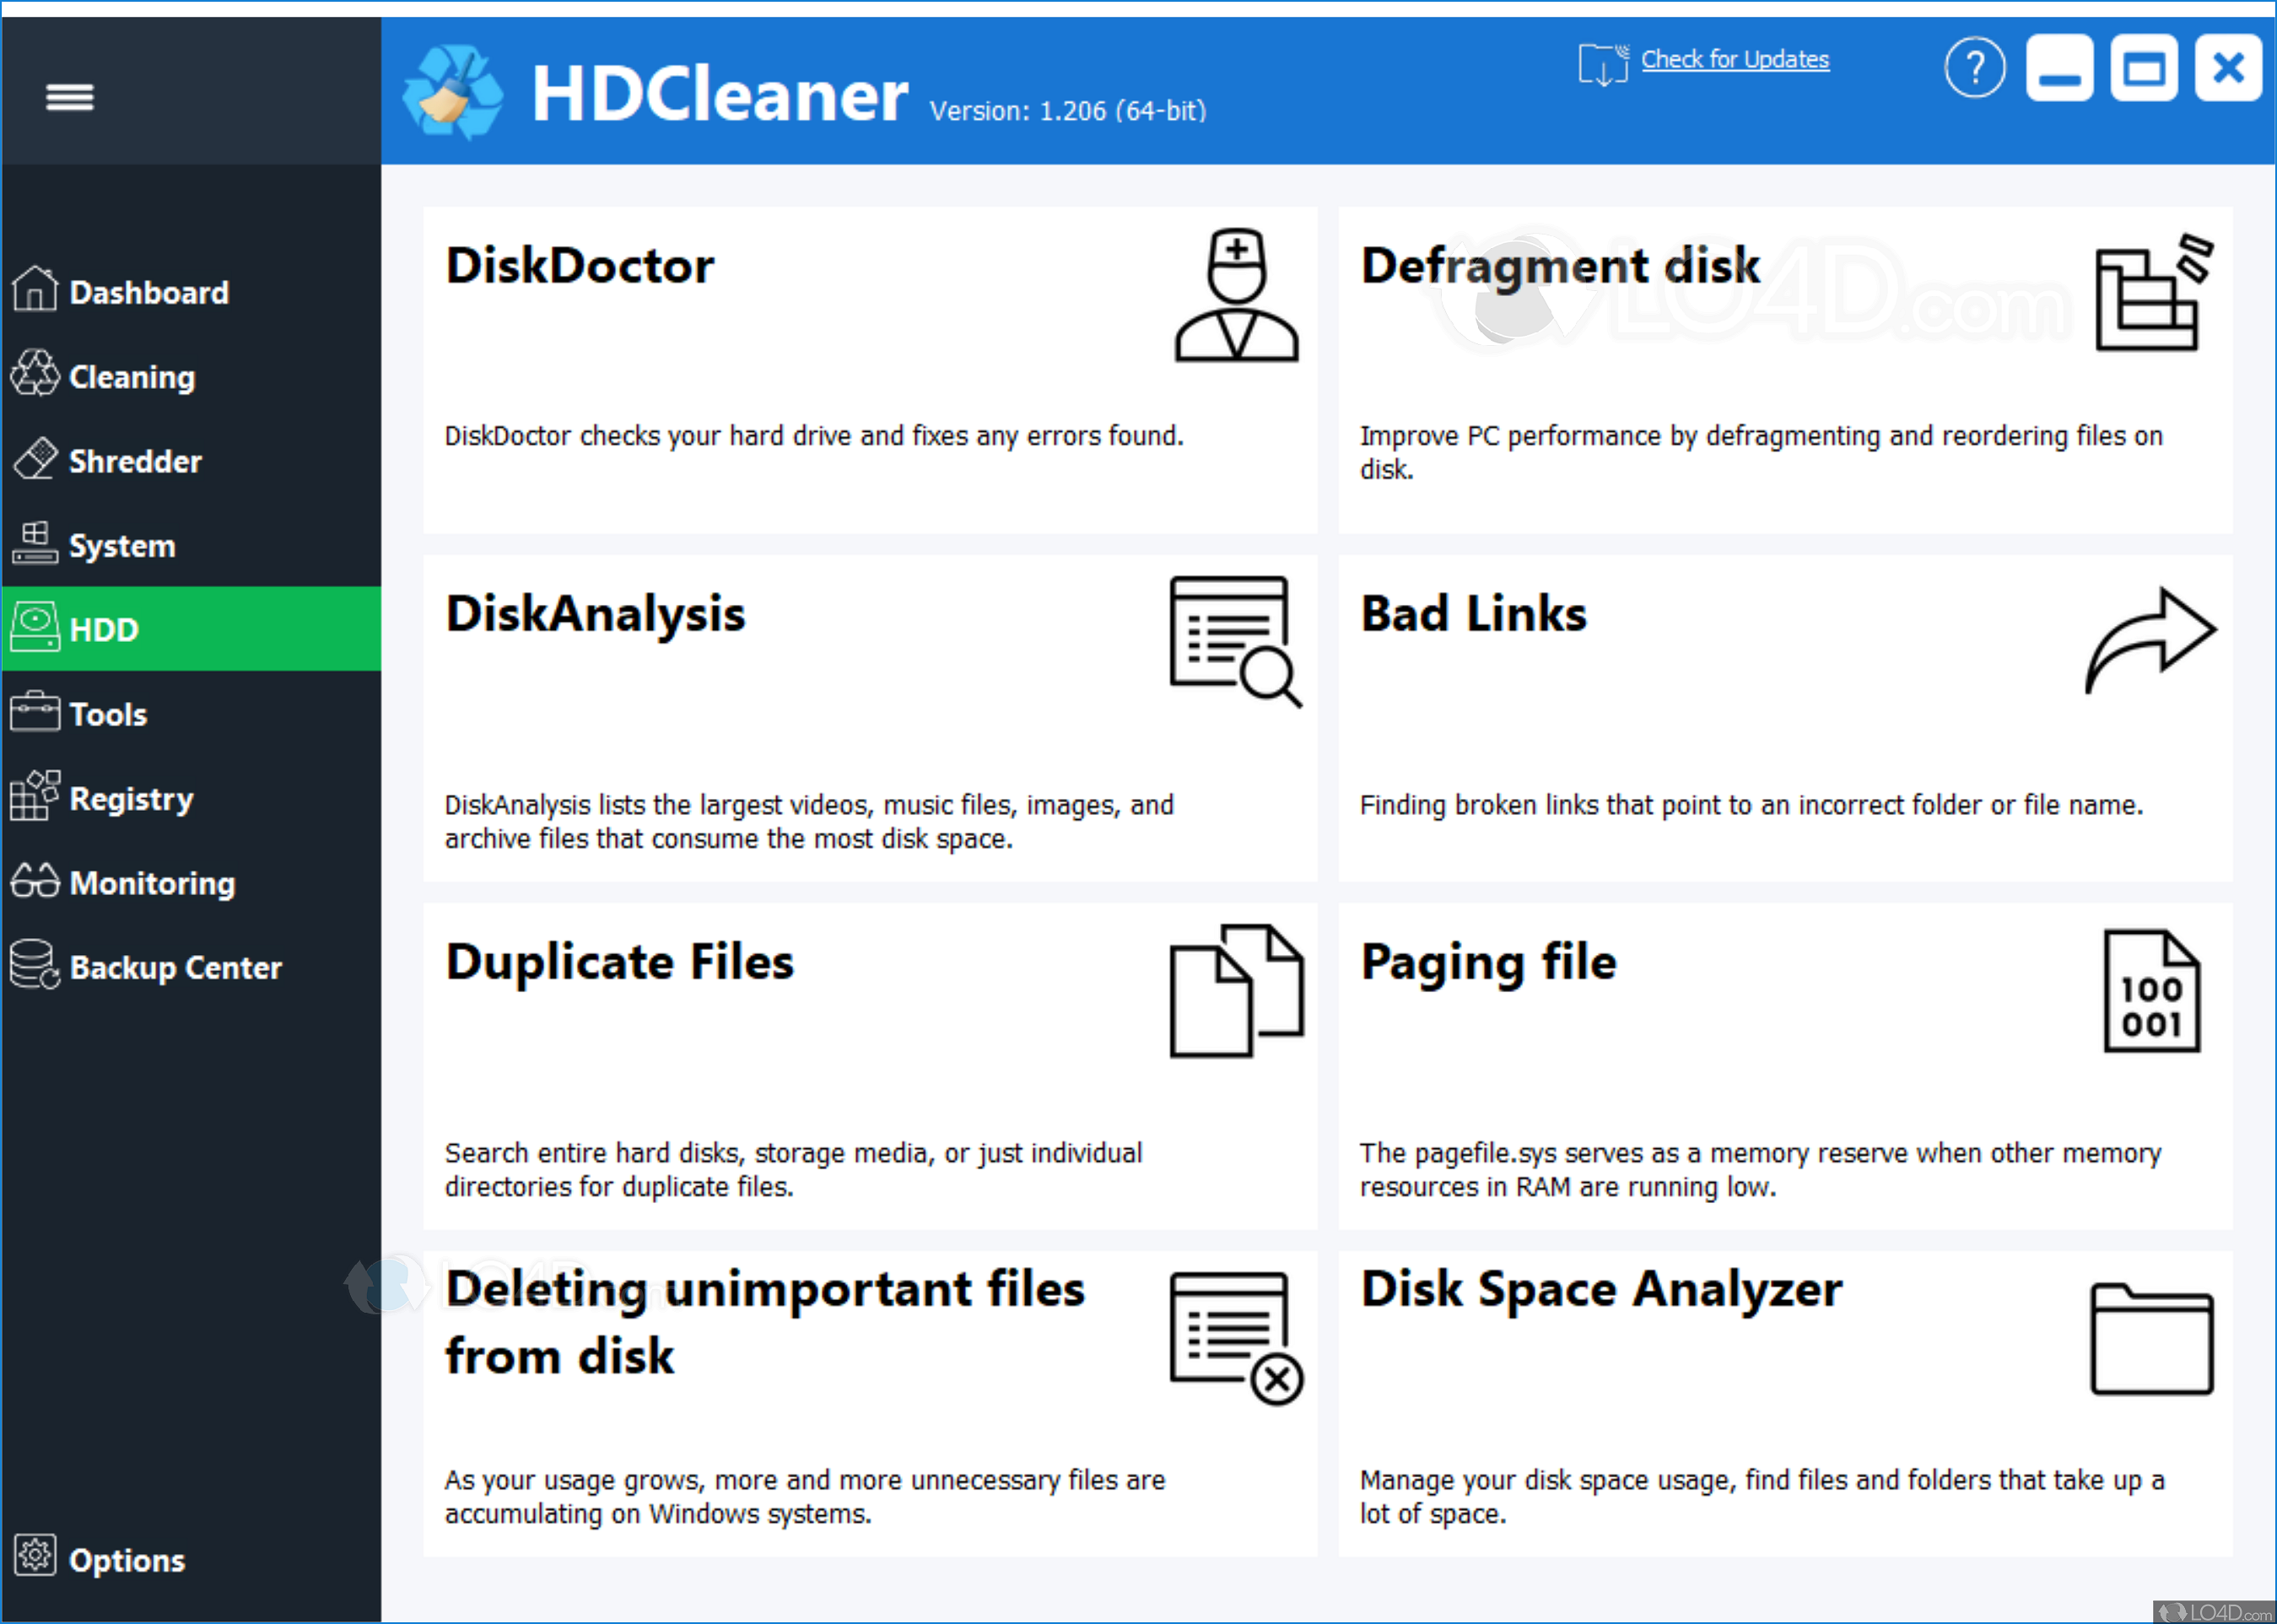 download the last version for mac HDCleaner 2.051